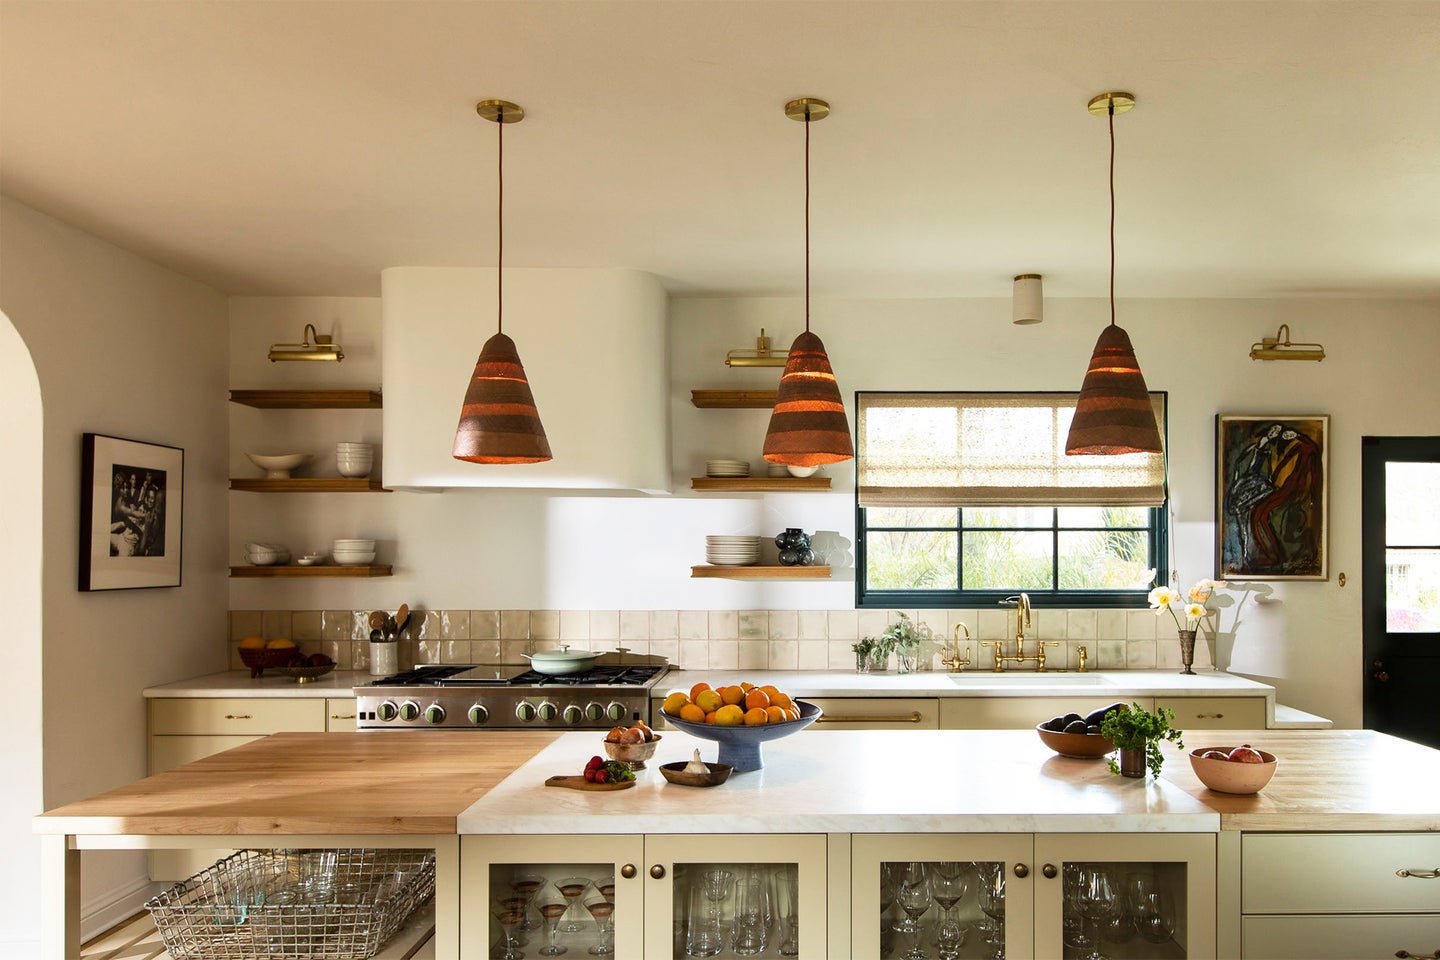 Cluttered Kitchen Counters Are a Non-Issue With This Clever Feature